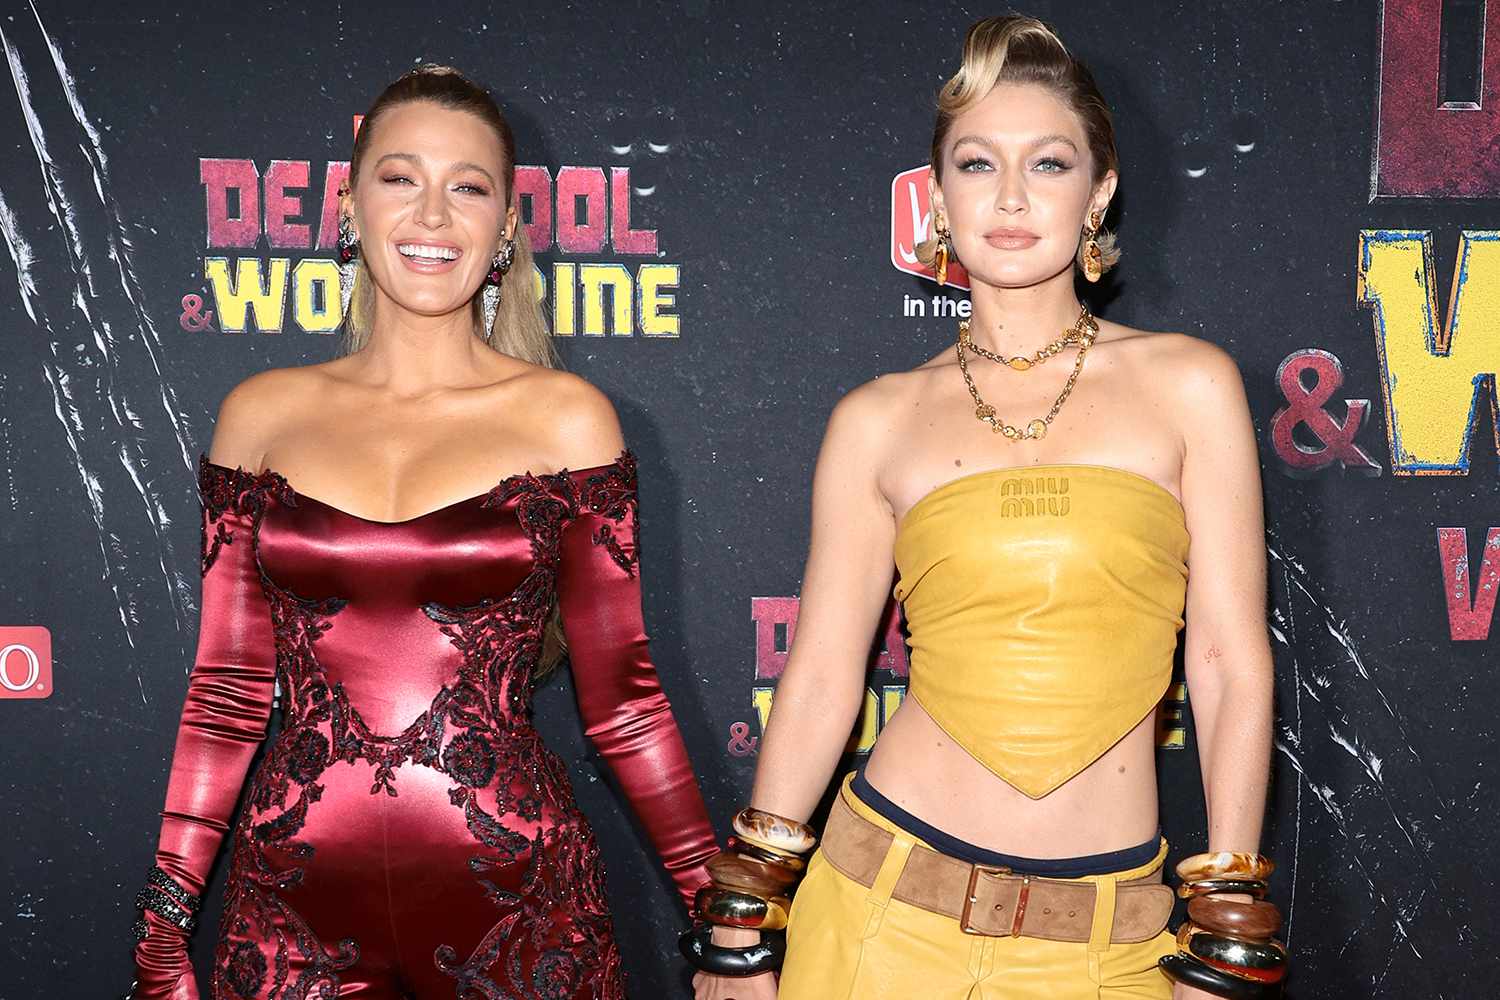 Blake Lively Tops Off Glam Floral-Inspired Look with Cozy Cardigan from Friend Gigi Hadid's Brand